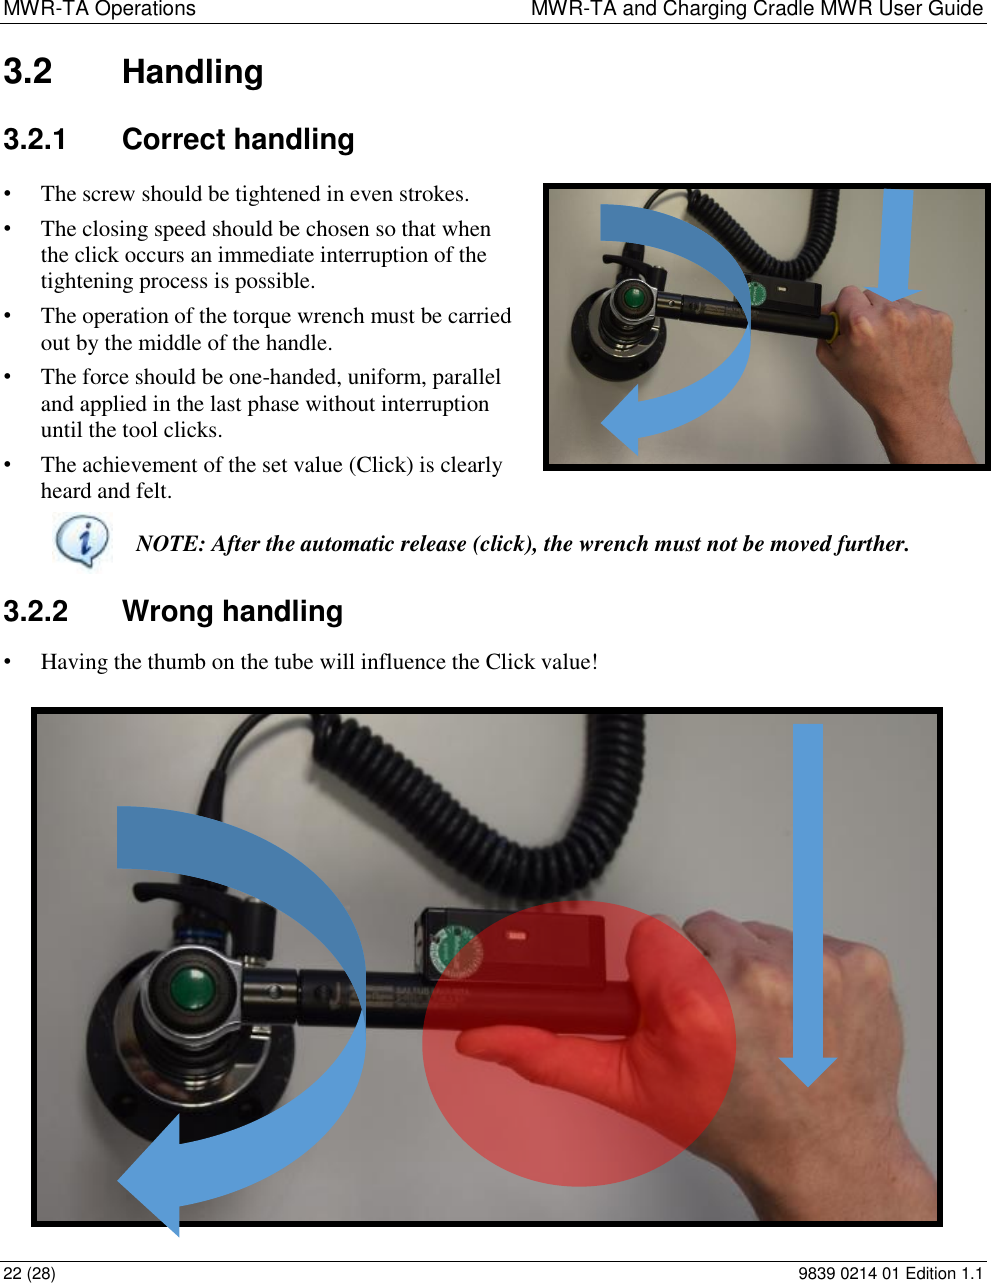 MWR-TA Operations  MWR-TA and Charging Cradle MWR User Guide 22 (28)  9839 0214 01 Edition 1.1 3.2  Handling 3.2.1  Correct handling • The screw should be tightened in even strokes. • The closing speed should be chosen so that when the click occurs an immediate interruption of the tightening process is possible. • The operation of the torque wrench must be carried out by the middle of the handle. • The force should be one-handed, uniform, parallel and applied in the last phase without interruption until the tool clicks. • The achievement of the set value (Click) is clearly heard and felt.  NOTE: After the automatic release (click), the wrench must not be moved further. 3.2.2  Wrong handling • Having the thumb on the tube will influence the Click value! 